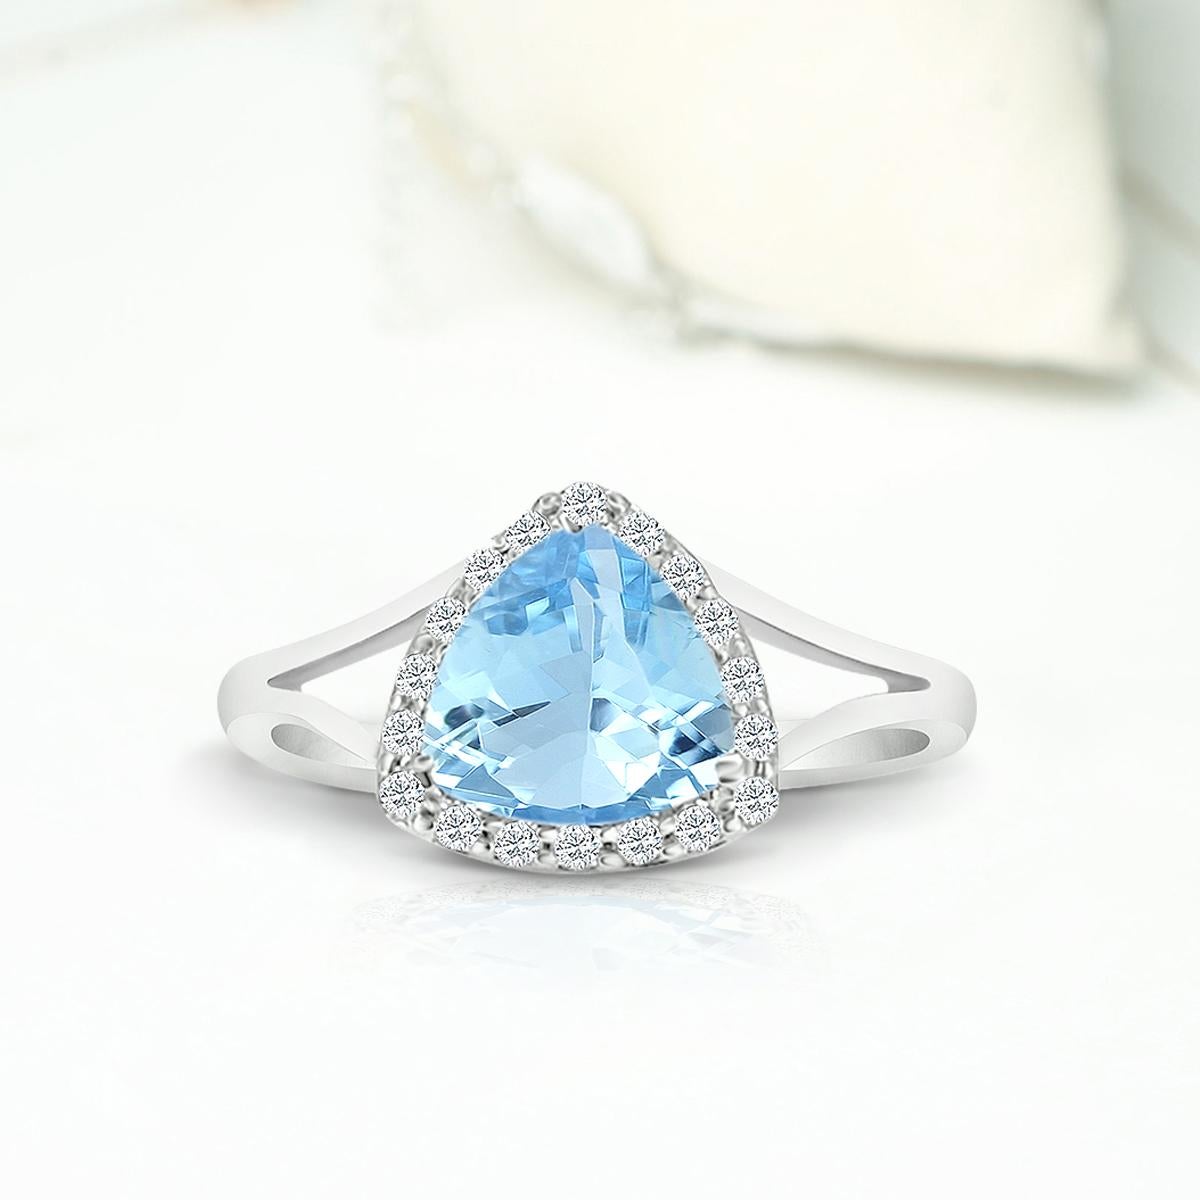 Modern 14k White Gold 0.94cts Aquamarine And Diamond Ring, Style# TS1275AQR 22053/10 For Sale